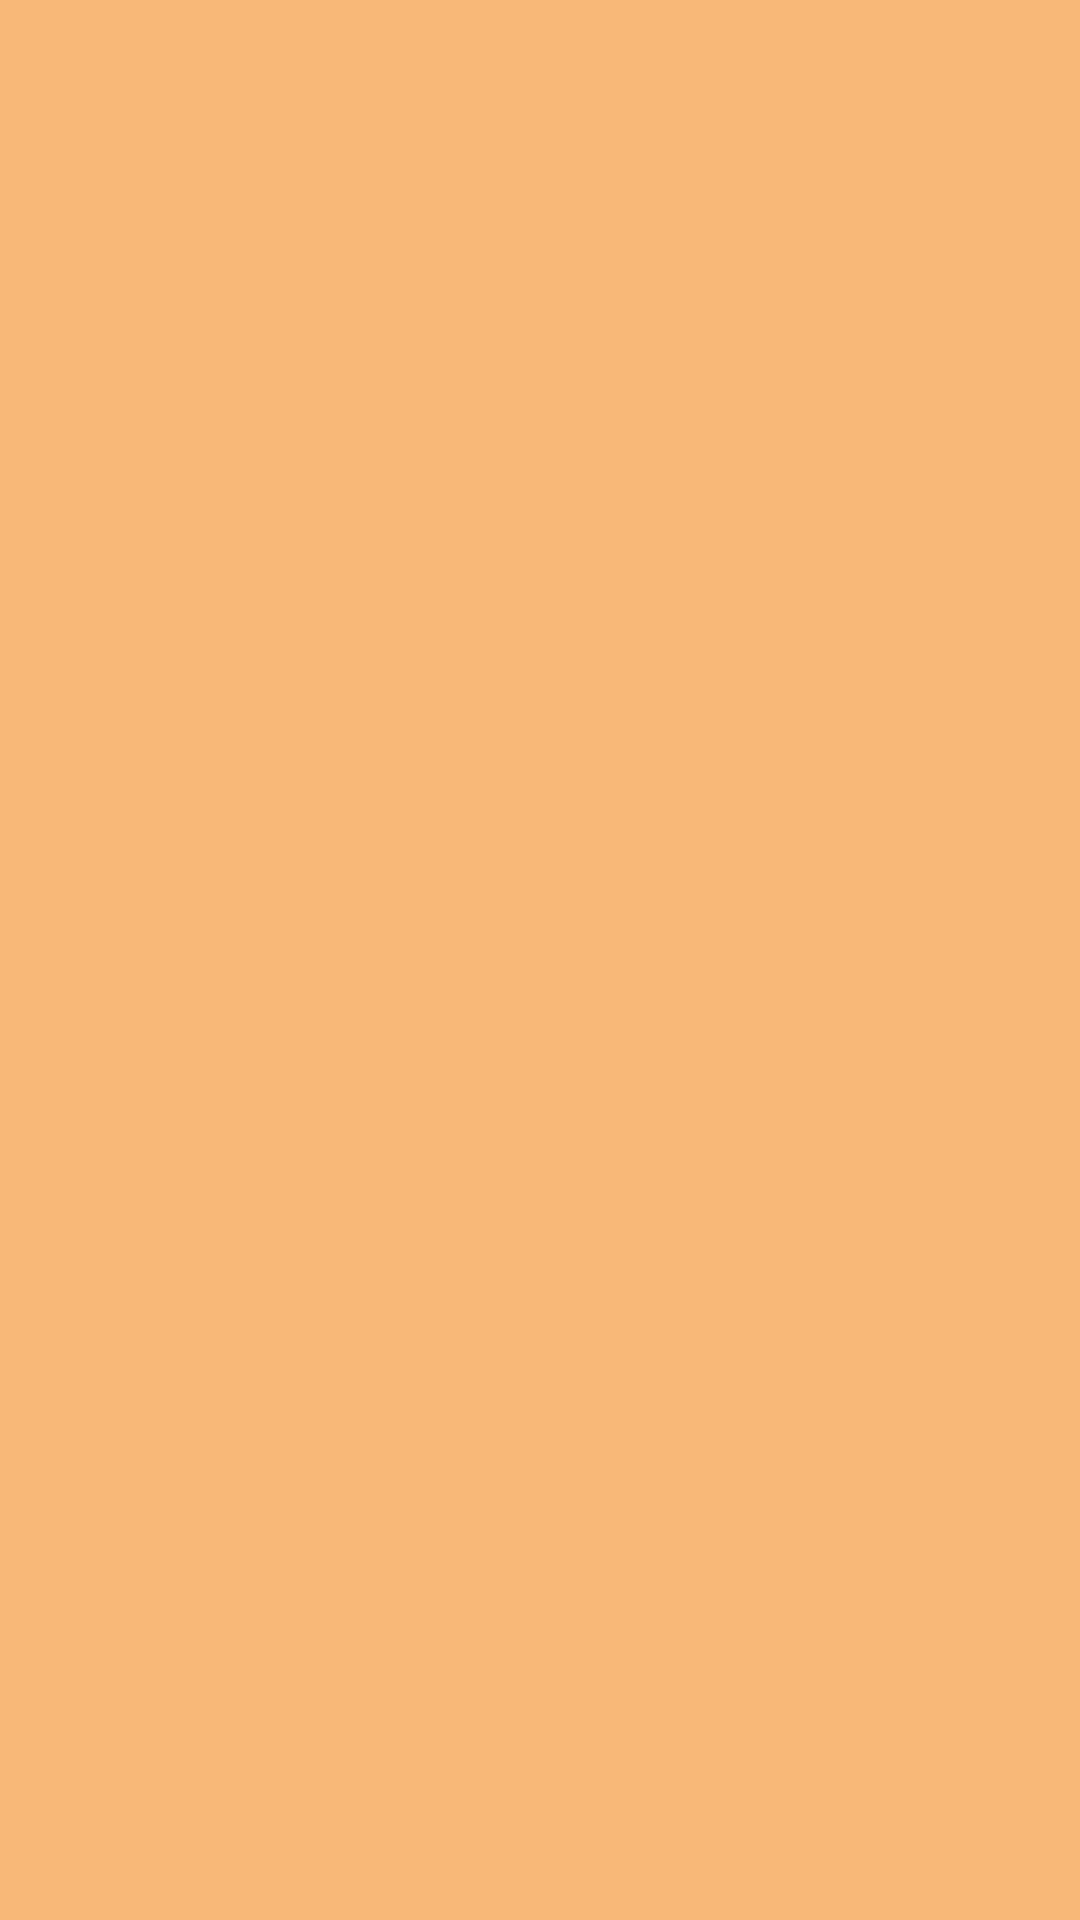 1080x1920 Mellow Apricot Solid Color Background